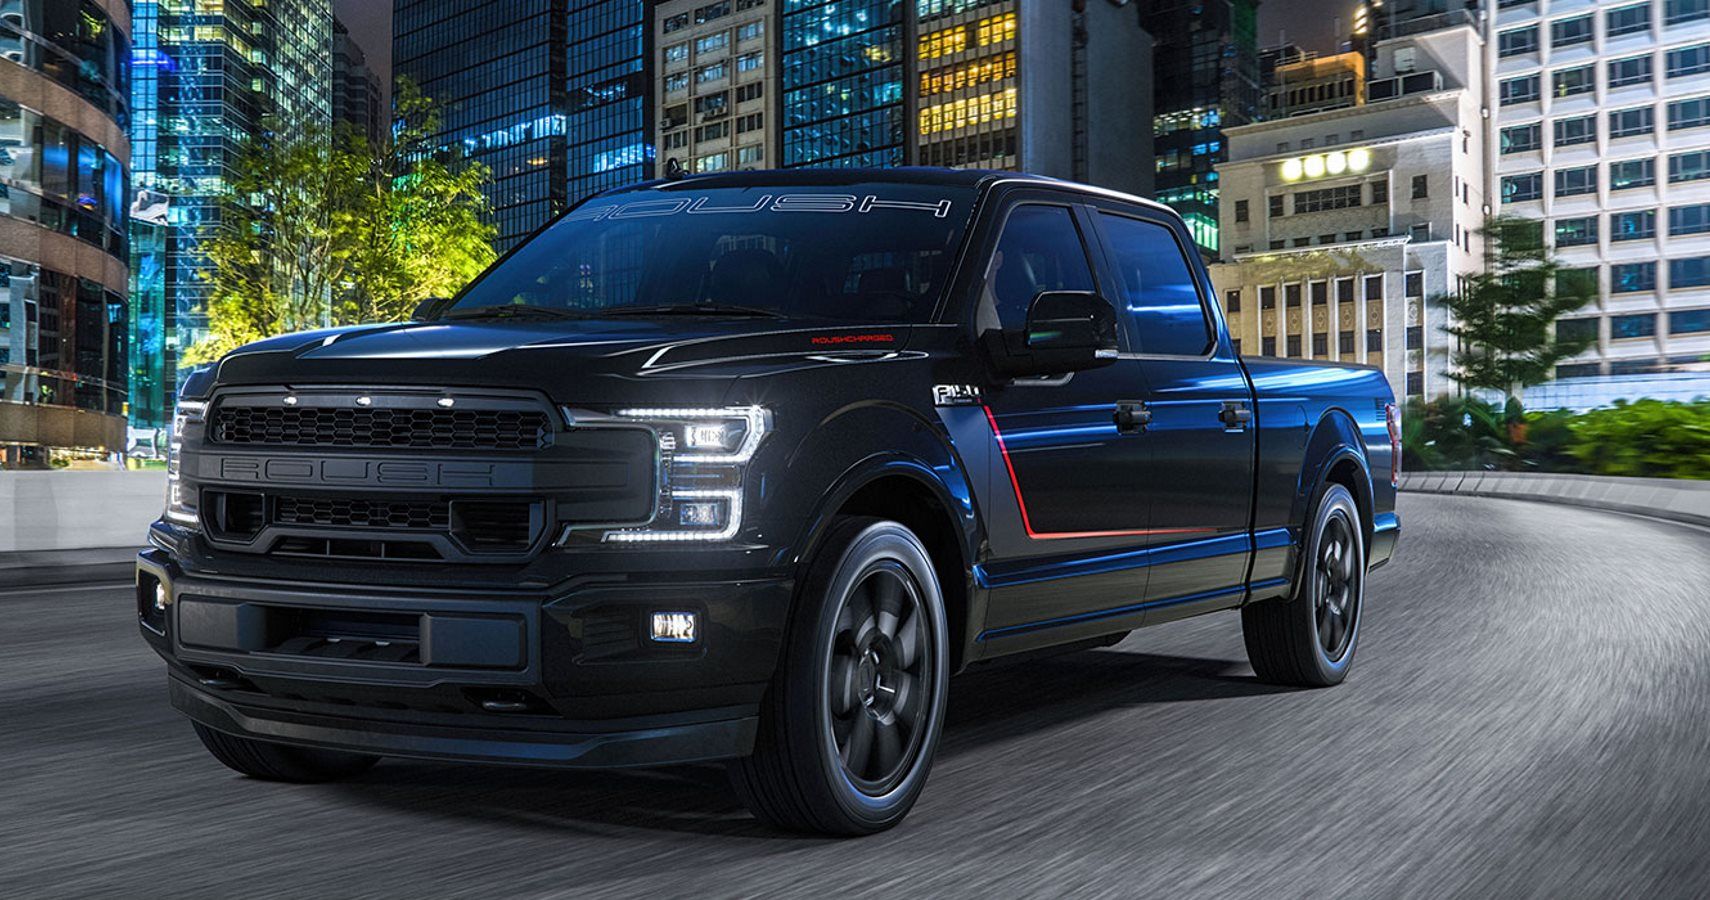 Check Out The Powerful 2018 Roush F-150 Nitemare